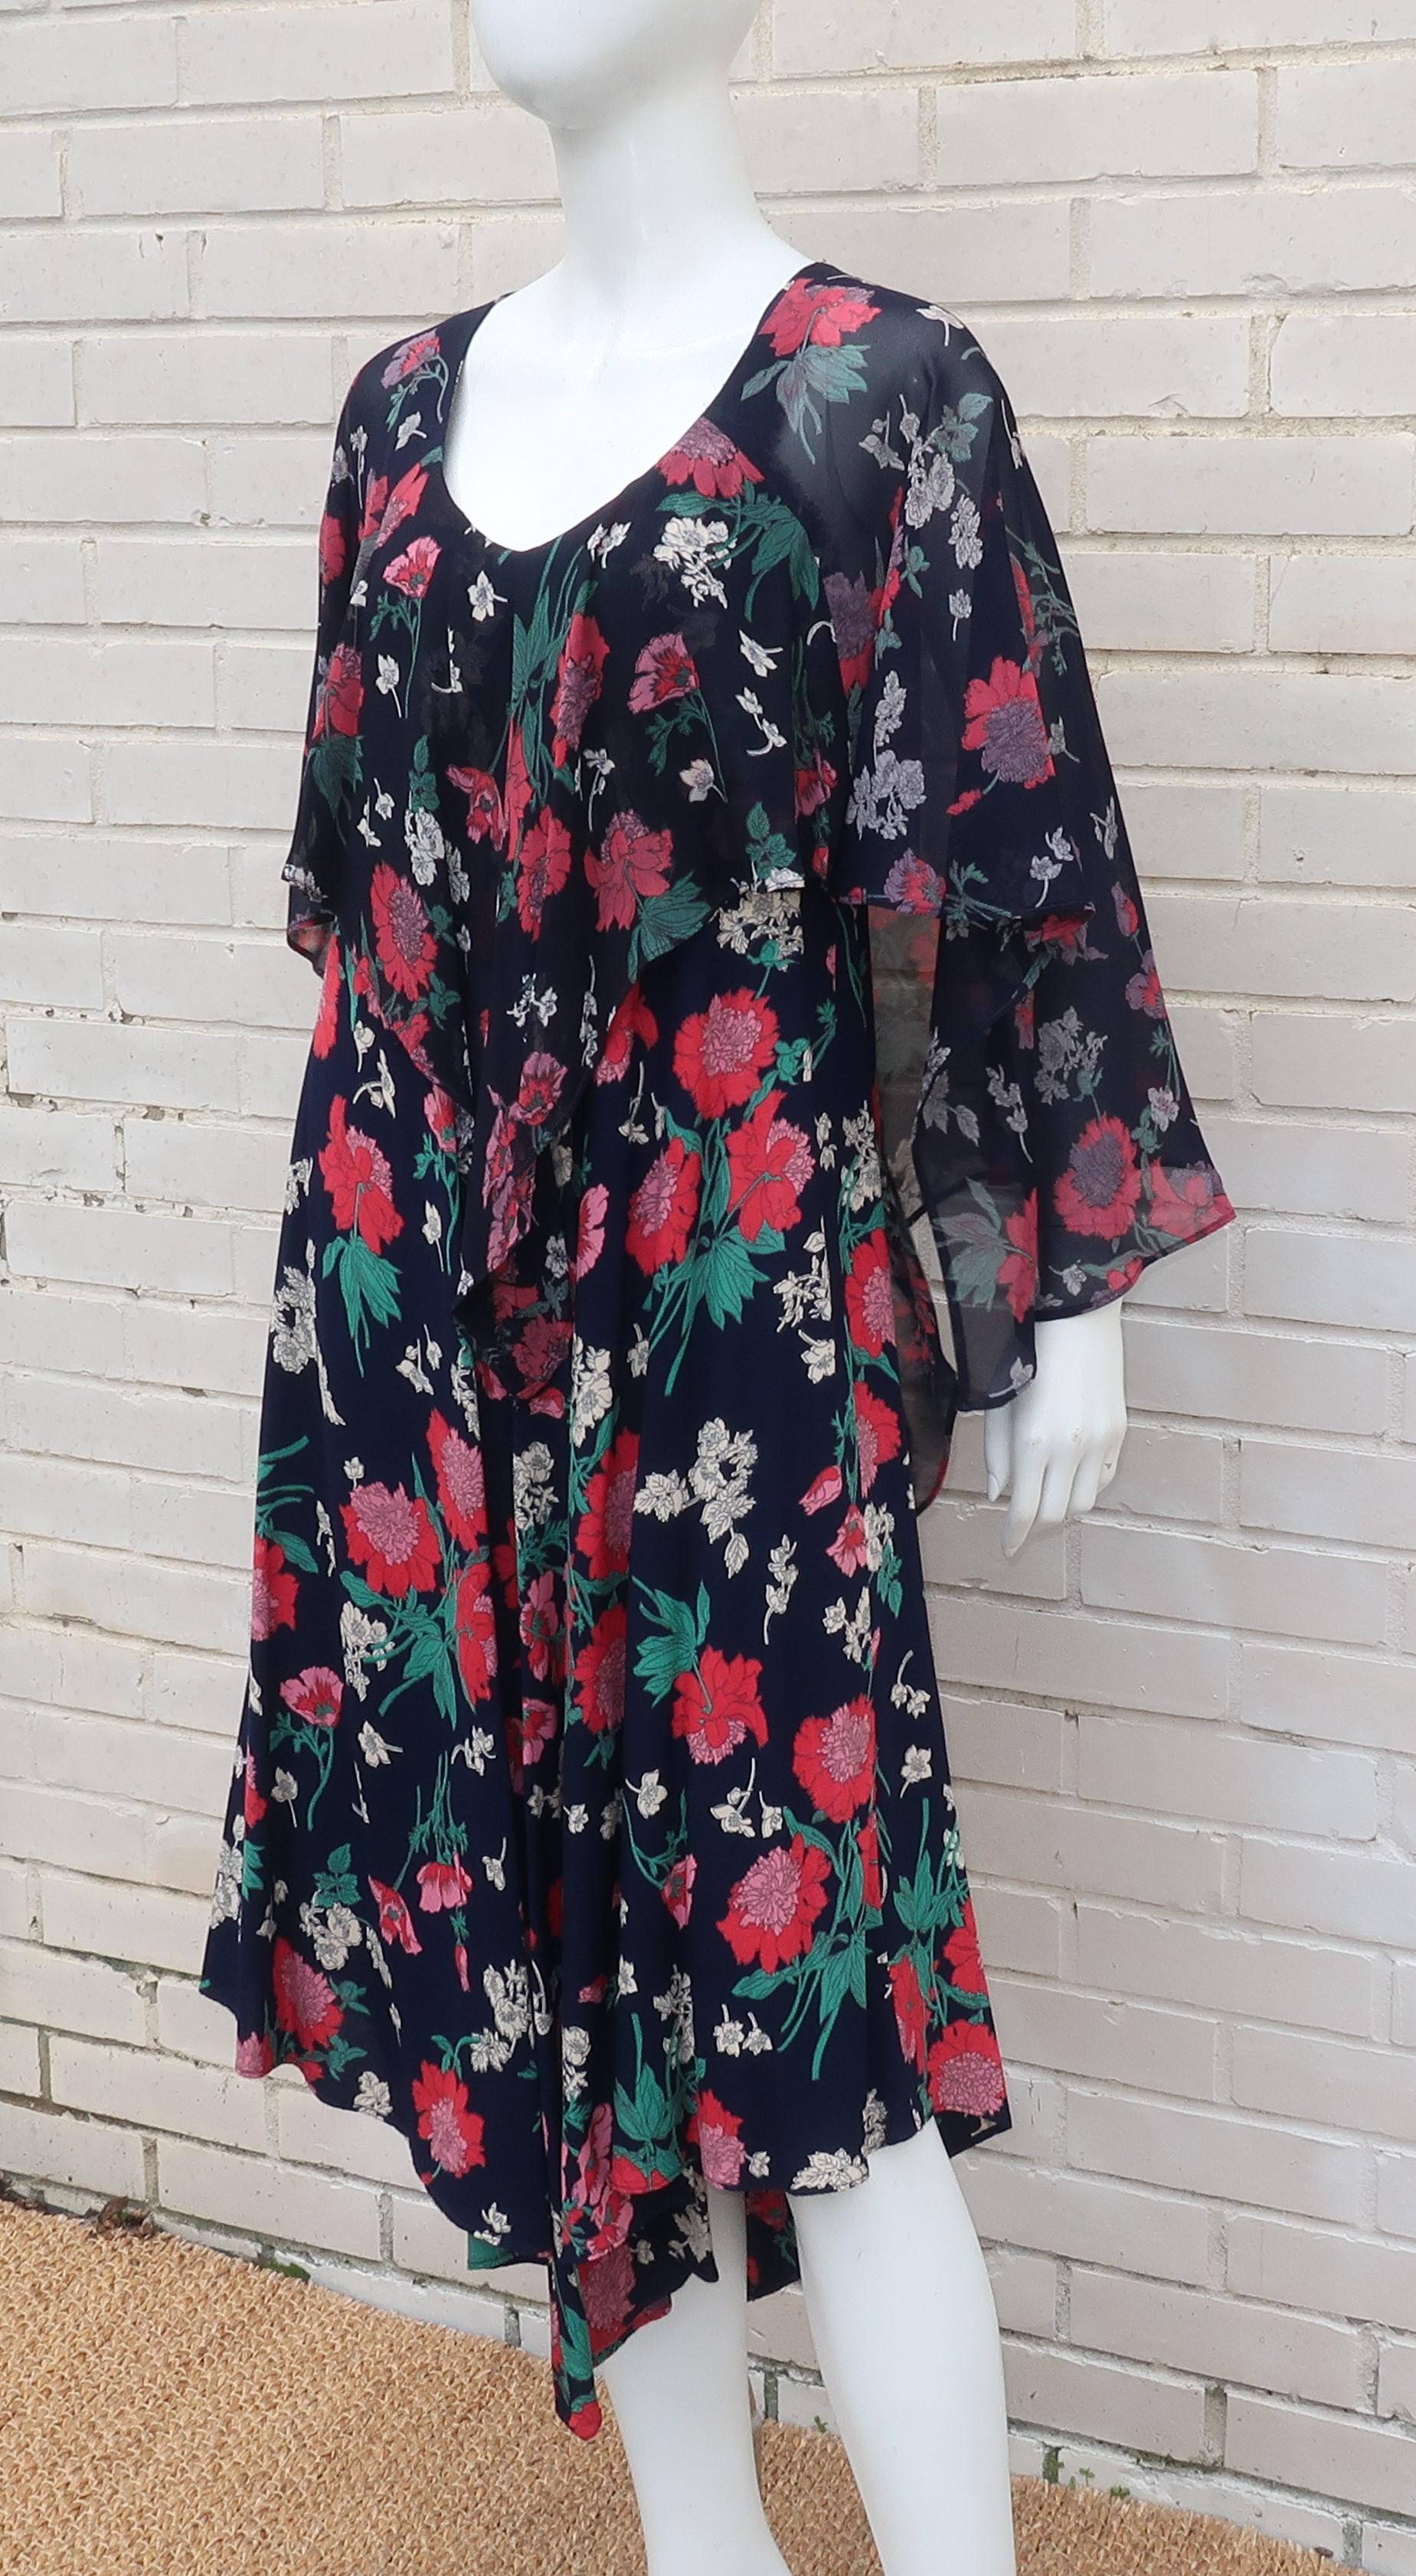 Early Nicole Miller 1970's Floral Bohemian Dress With Overlay  2